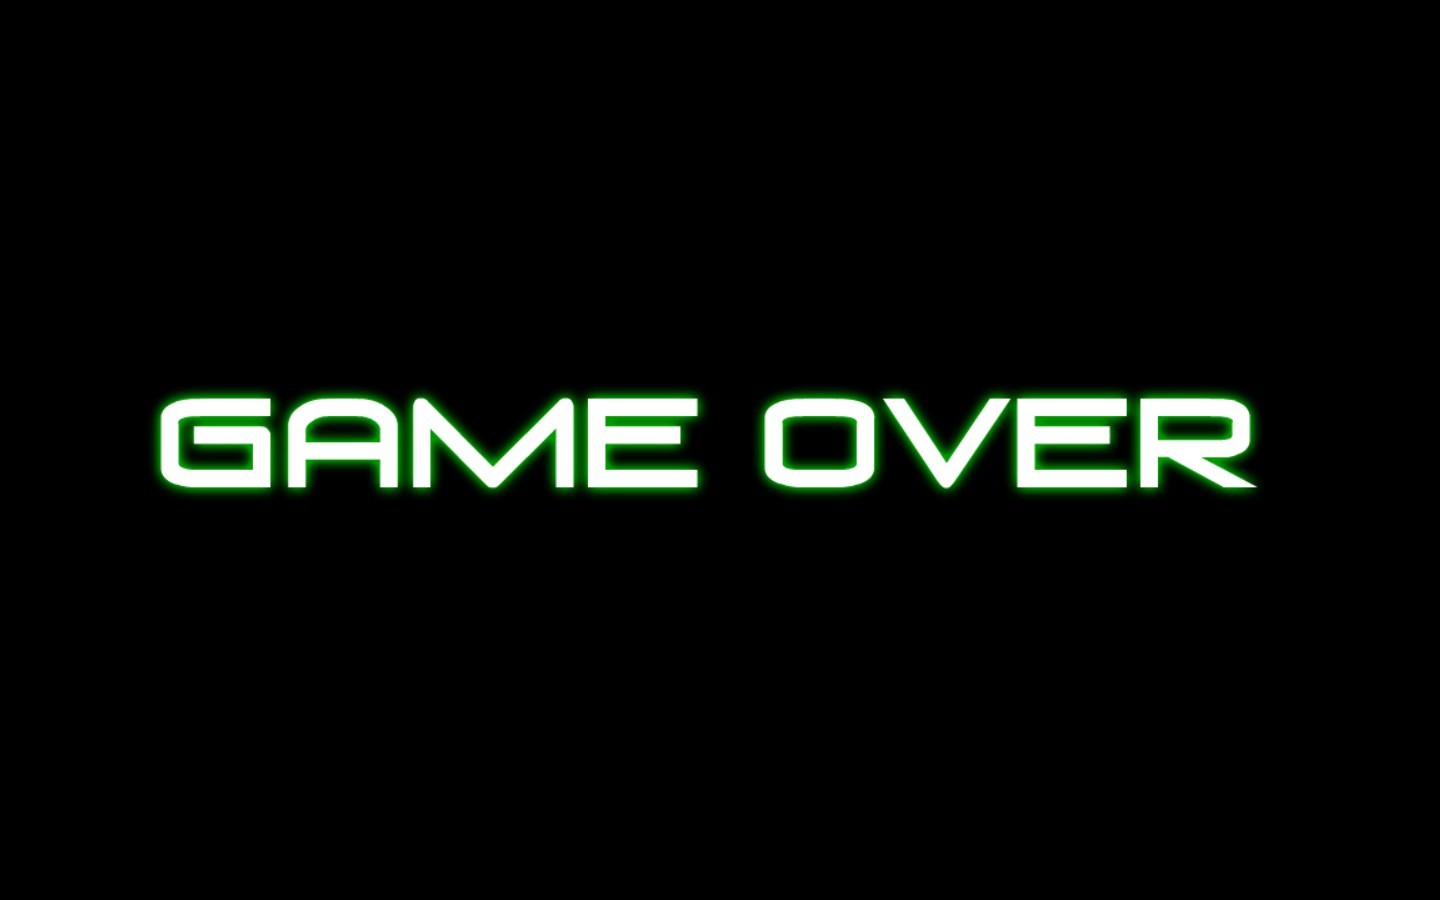 Steam Software Video Games GAME OVER Text Screen Shot 1440x900